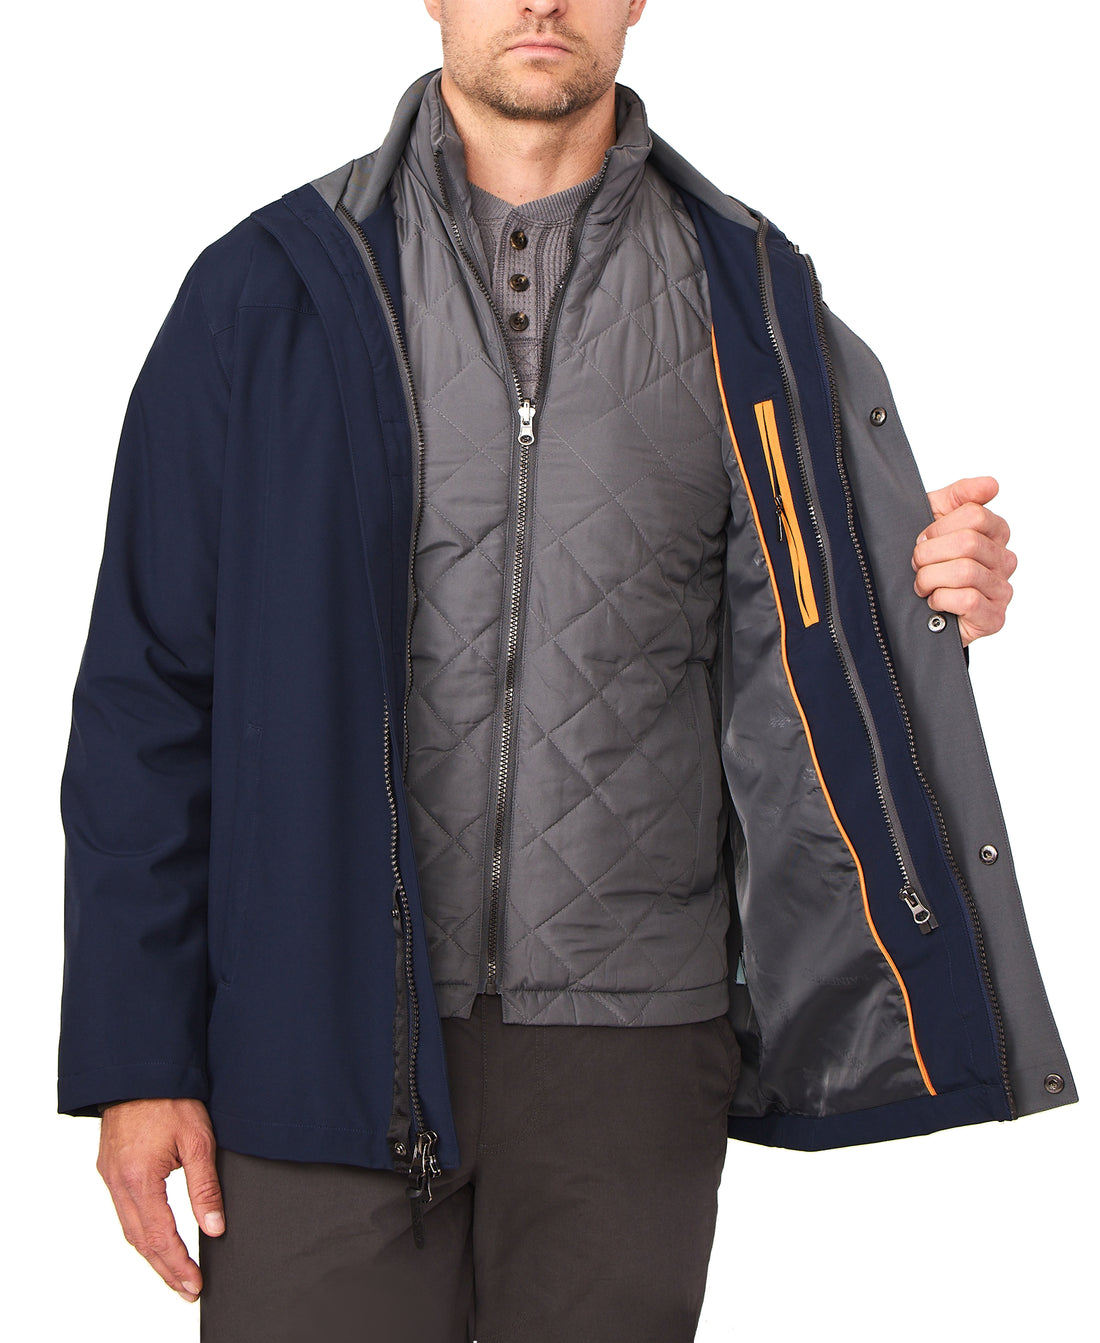 THE UTILITY 3 IN 1 SOFTSHELL